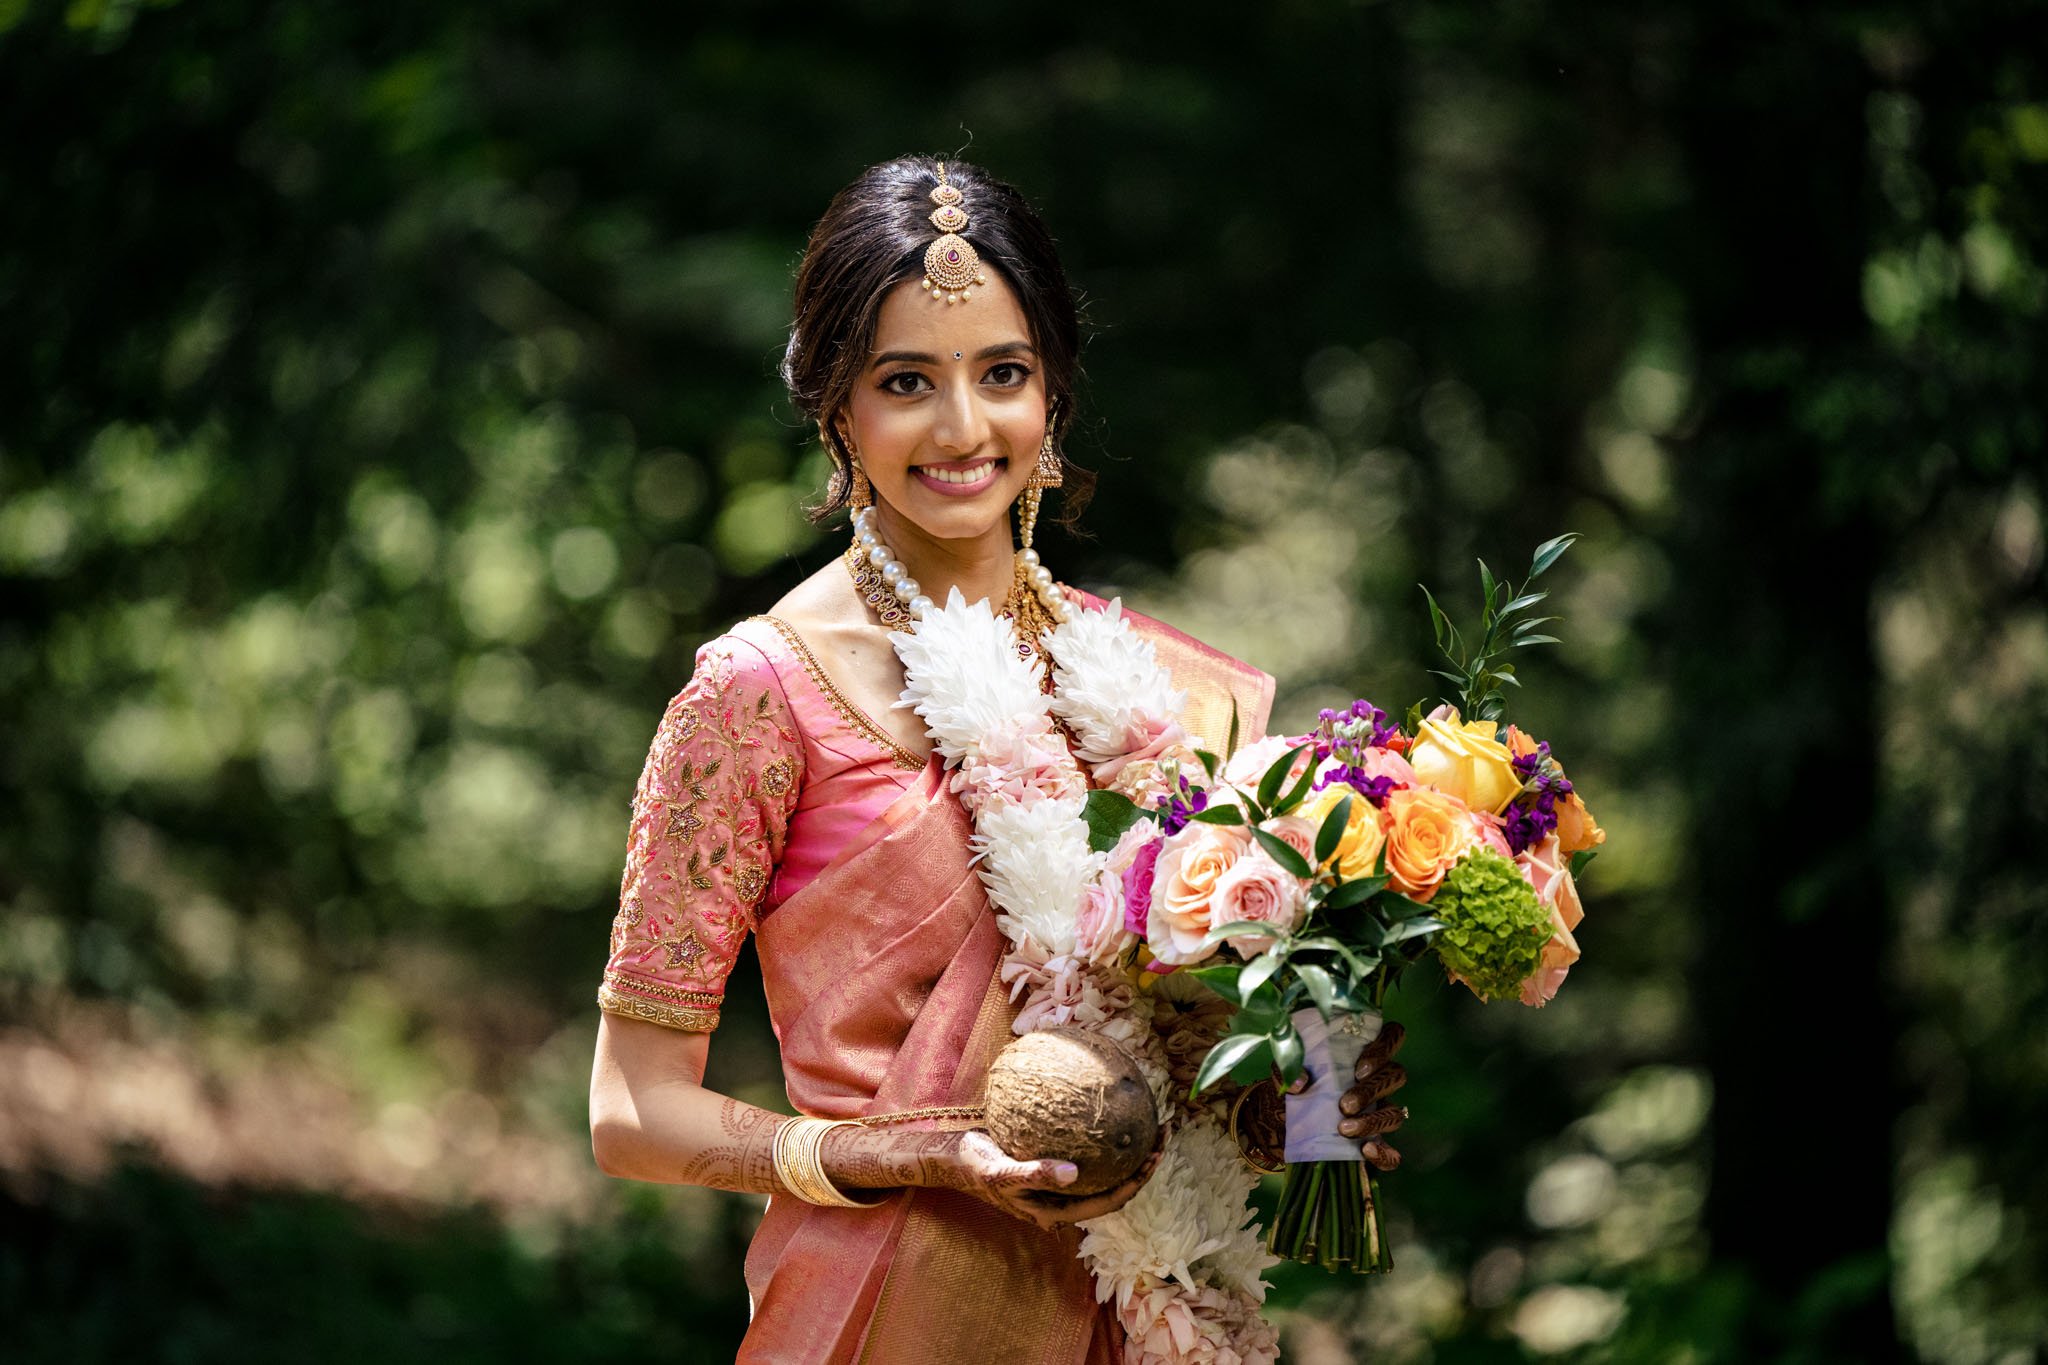 An Indian bride at the Biltmore Estate wedding in a pink sari holding a bouquet.